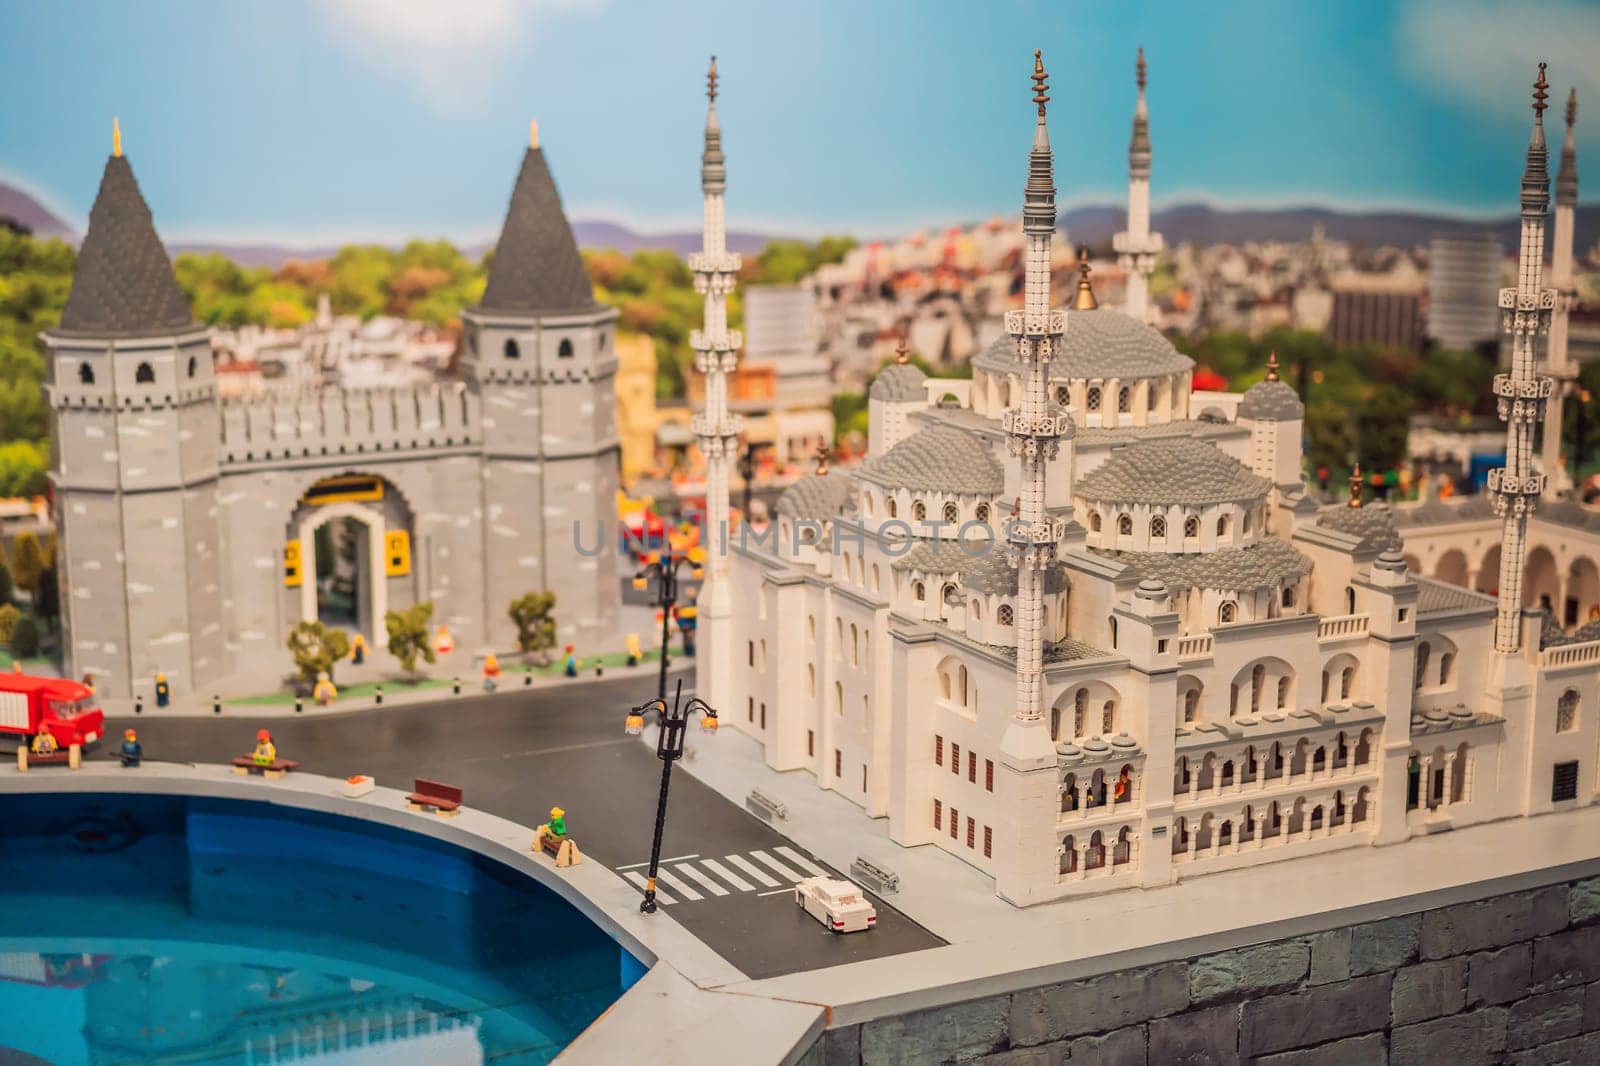 24.08.22 Istanbul, Turkey: Turkish sights made from Lego.